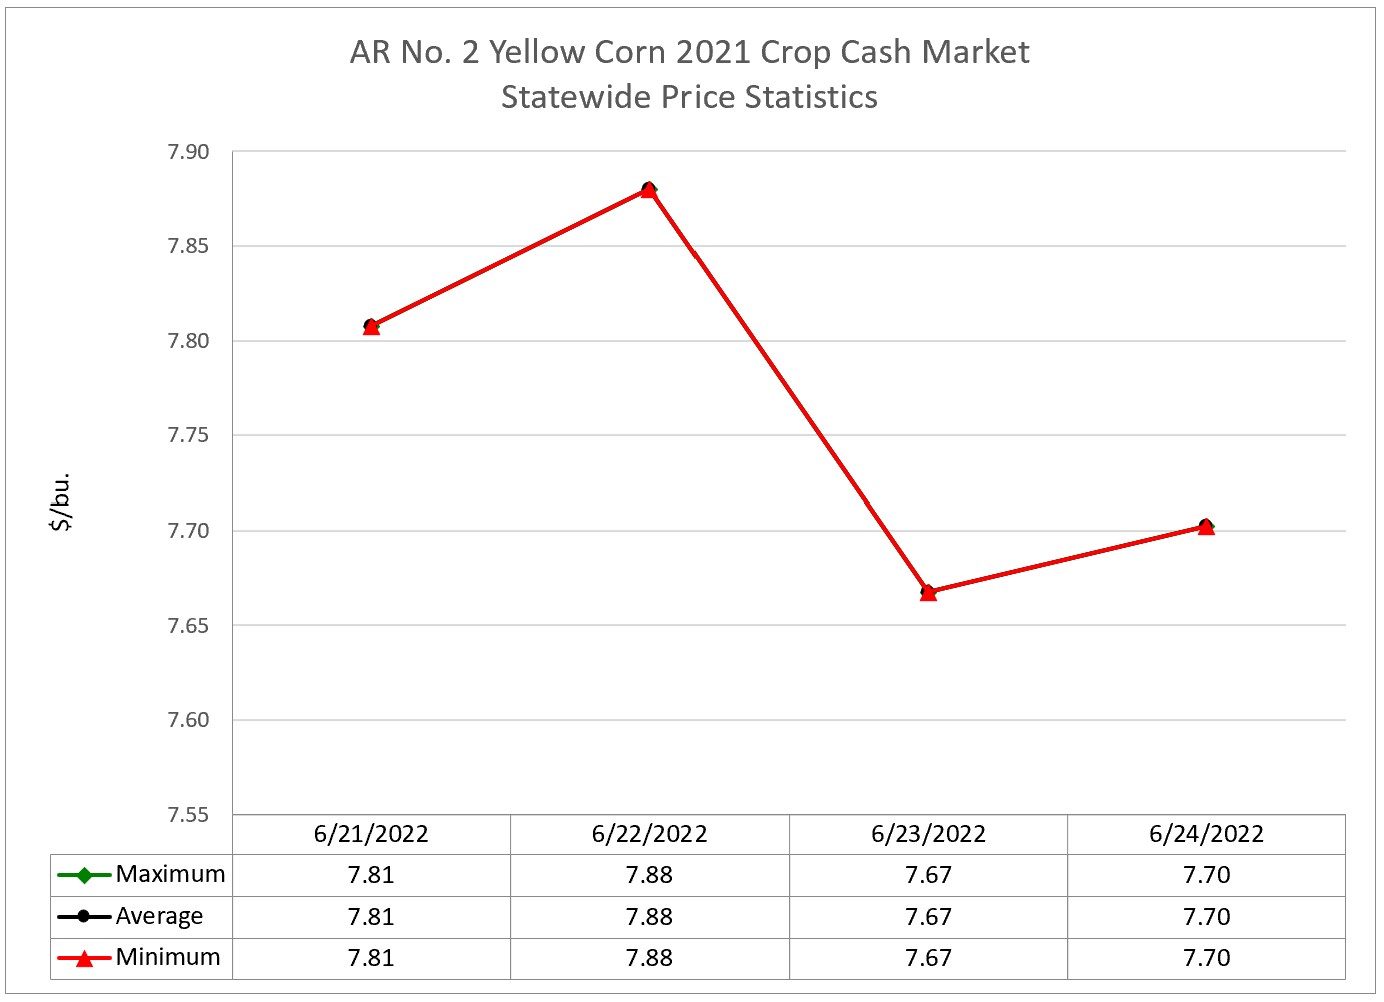 2021 Crop Corn Cash Market Statistics (June 20 – 24, 2022) - a line graph indicating the maximum, average, and minimum prices from 1 location throughout the week.